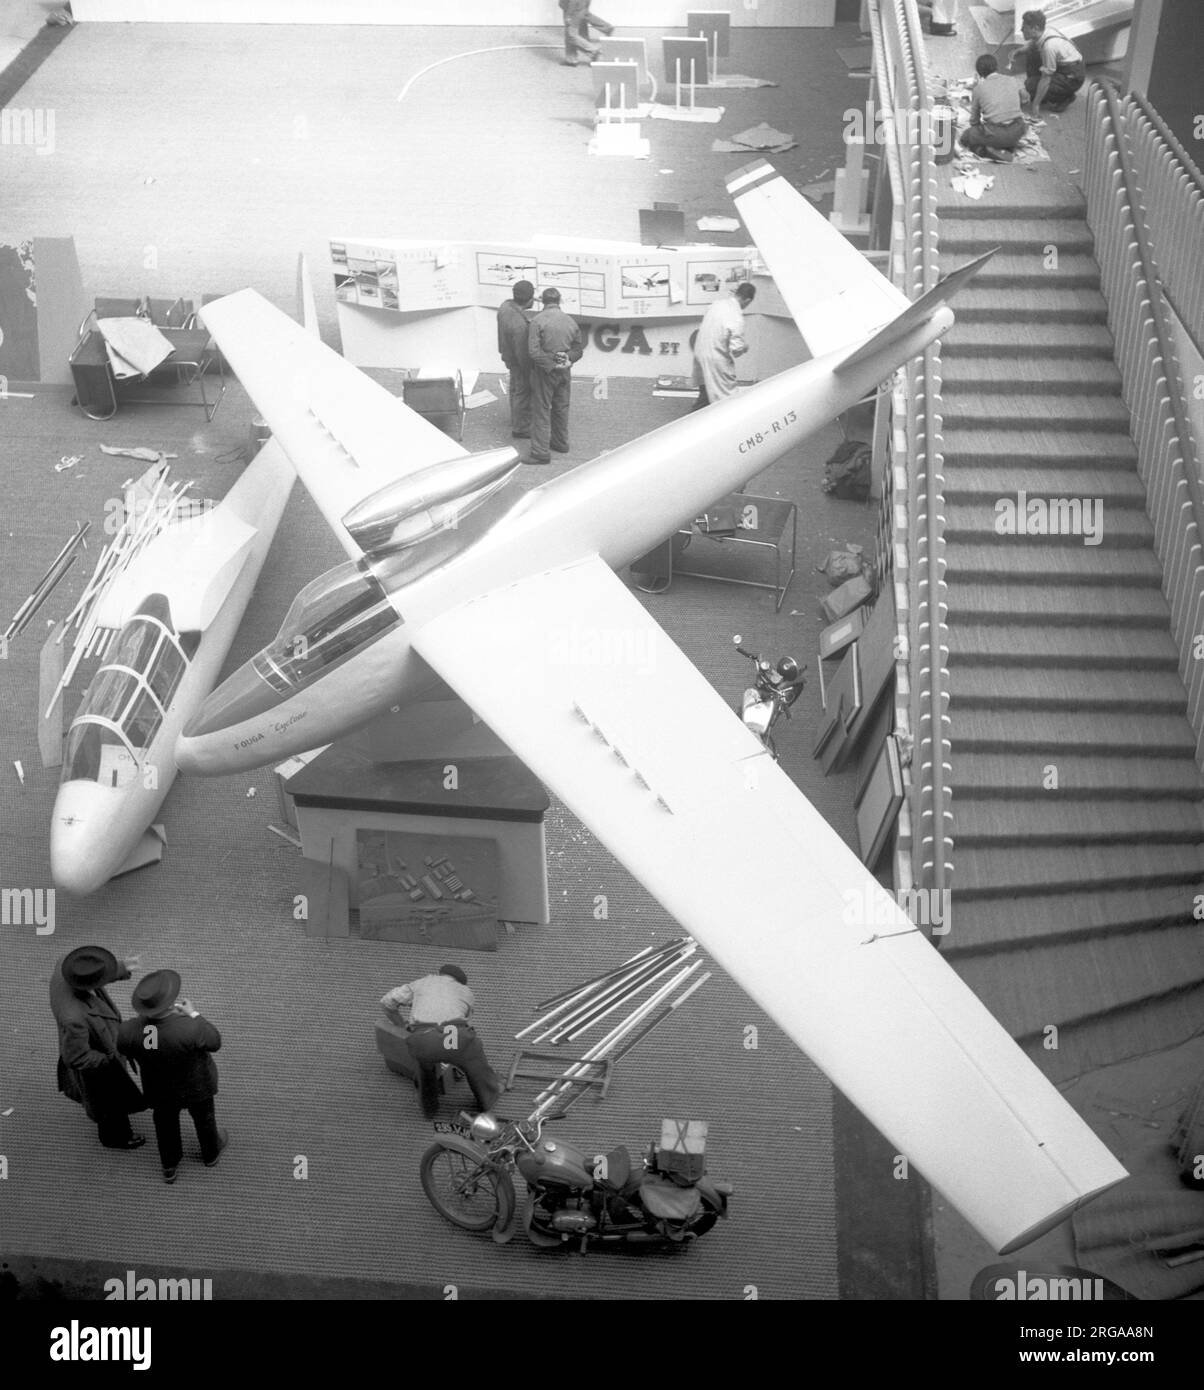 Fouga CM.8 R13 Cyclone at the XVIIIeme Salon Aeronautique du Paris 1949 at the Grand Palais in central Paris, (flying demonstrations were given at Orly Airport). The Turbomeca Pimene powered CM.8 R13 is hanging above the fuselage of a Fouga-Castel-Mauboussin CM.7 two-seat trainer. Stock Photo